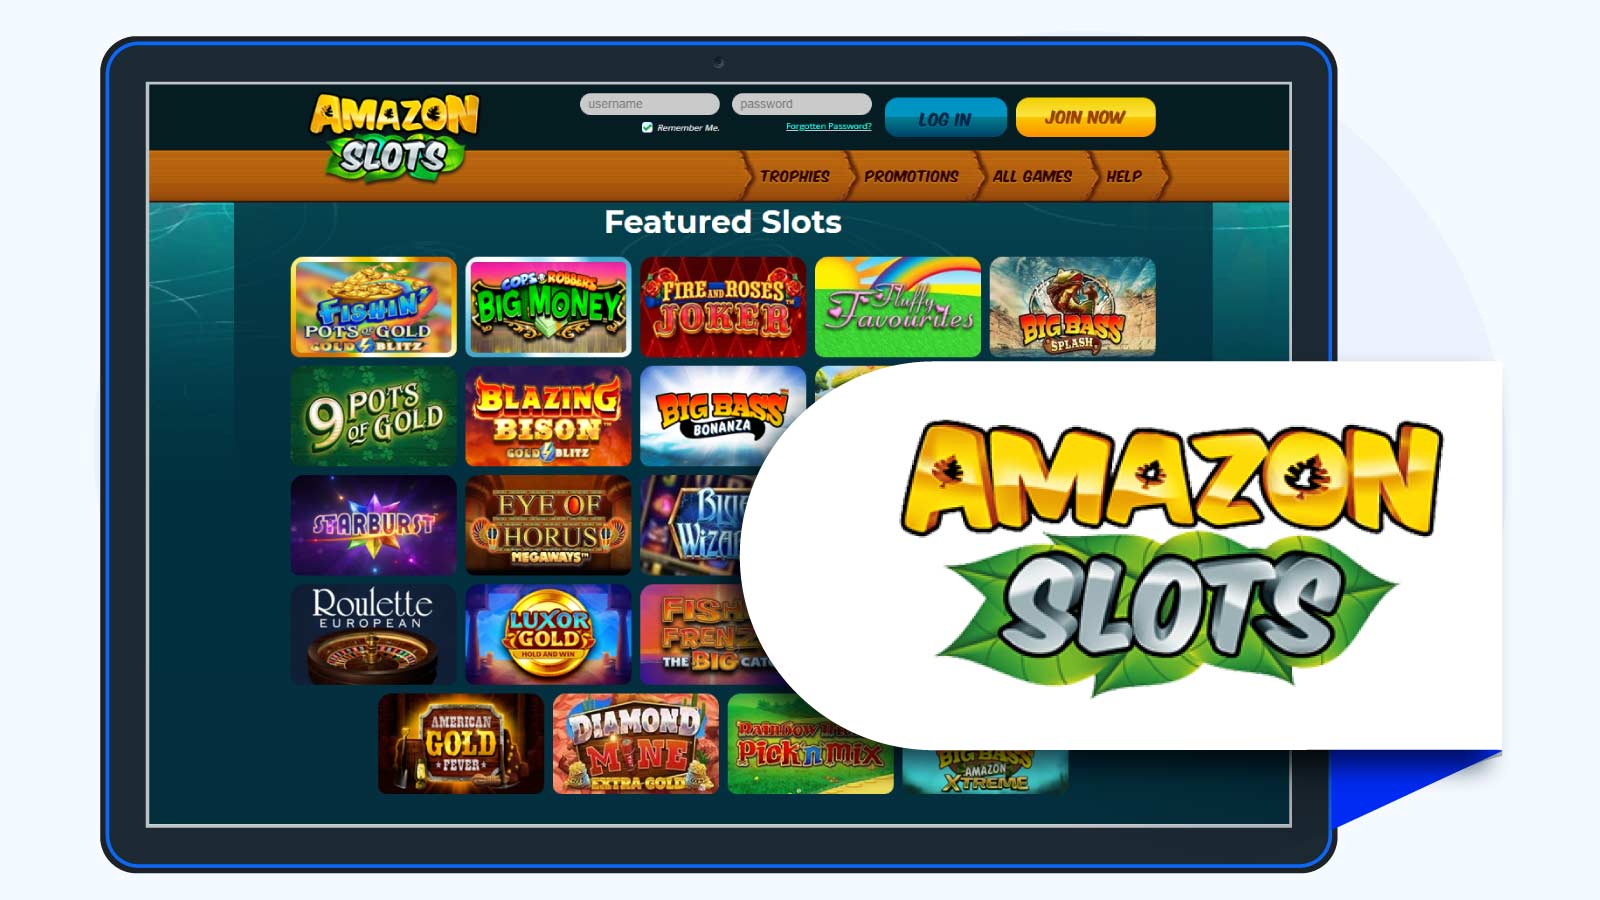 Amazon Slots Best Free Slots Online No Deposit for Inexperienced Players